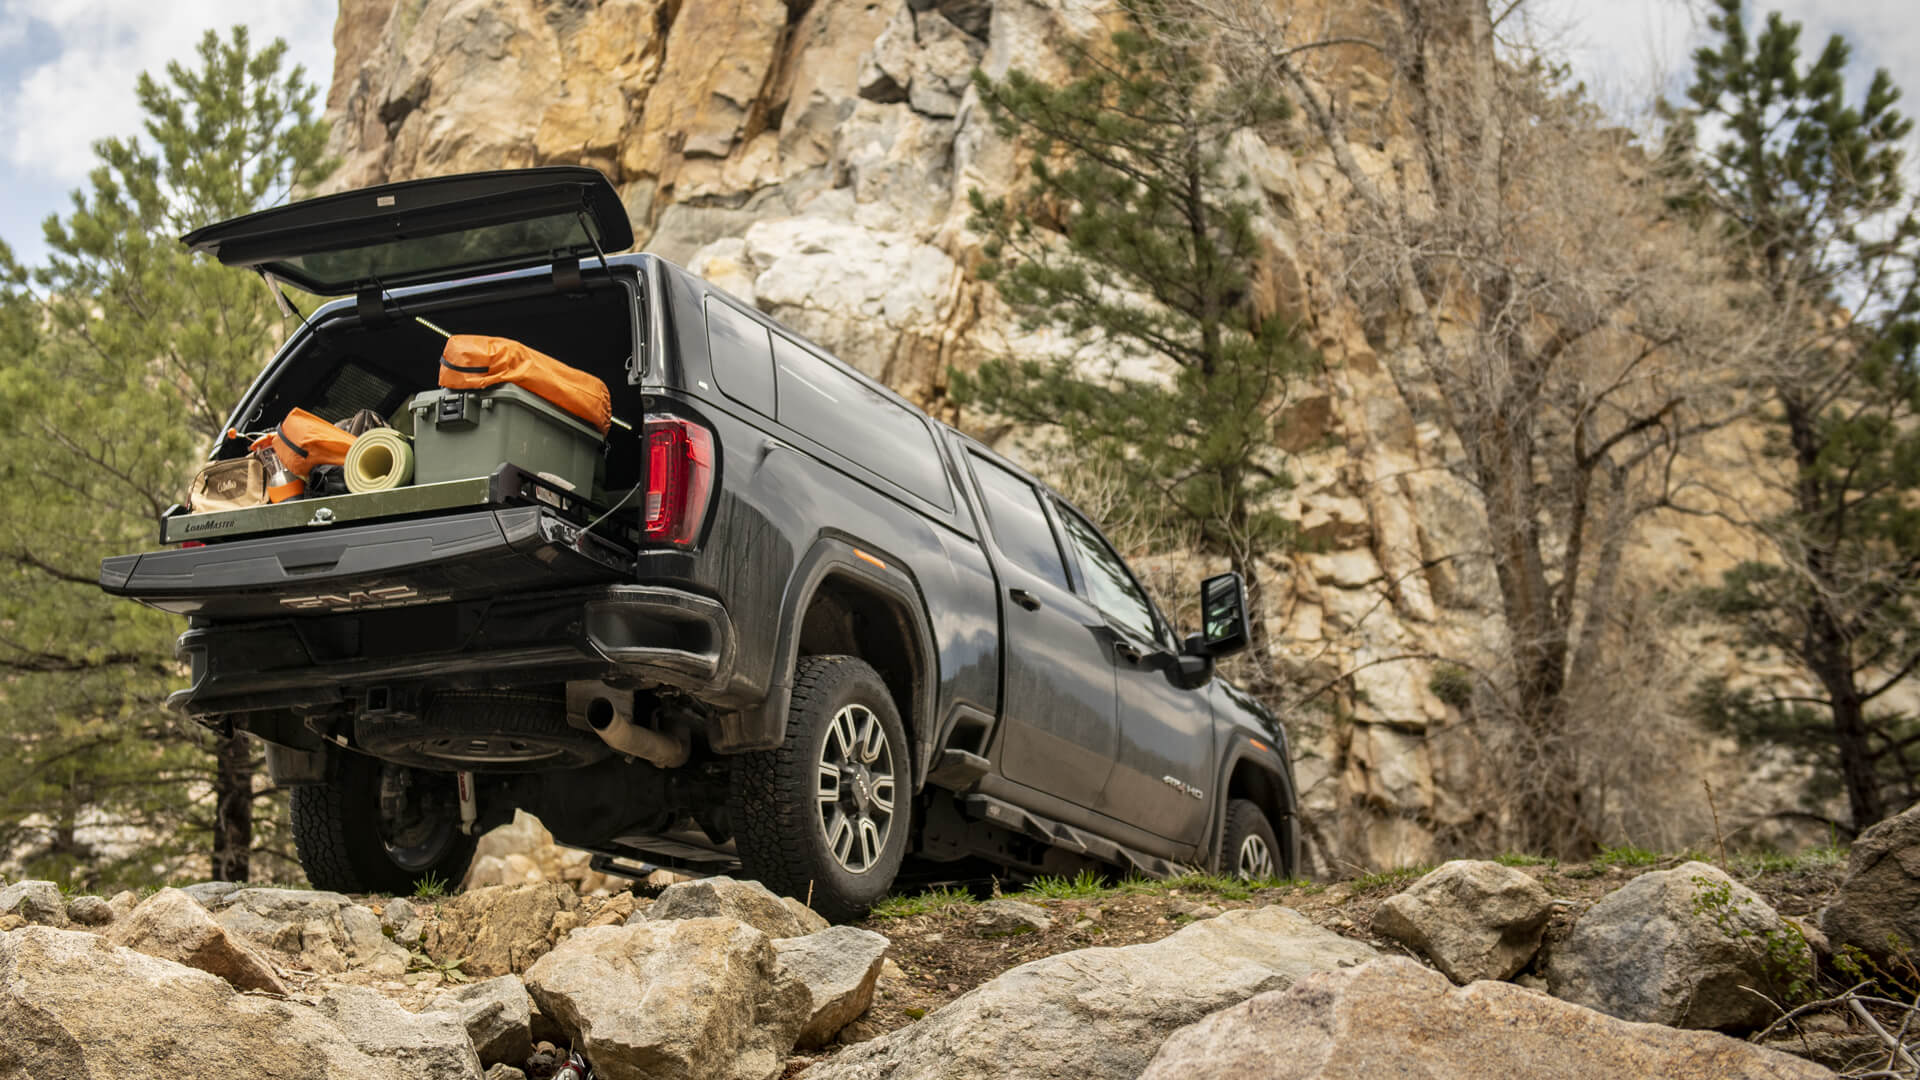 Black GMC Sierra with an ATC truck cap containing camping supplies and perched on a rocky road in a forest under an overcast sky